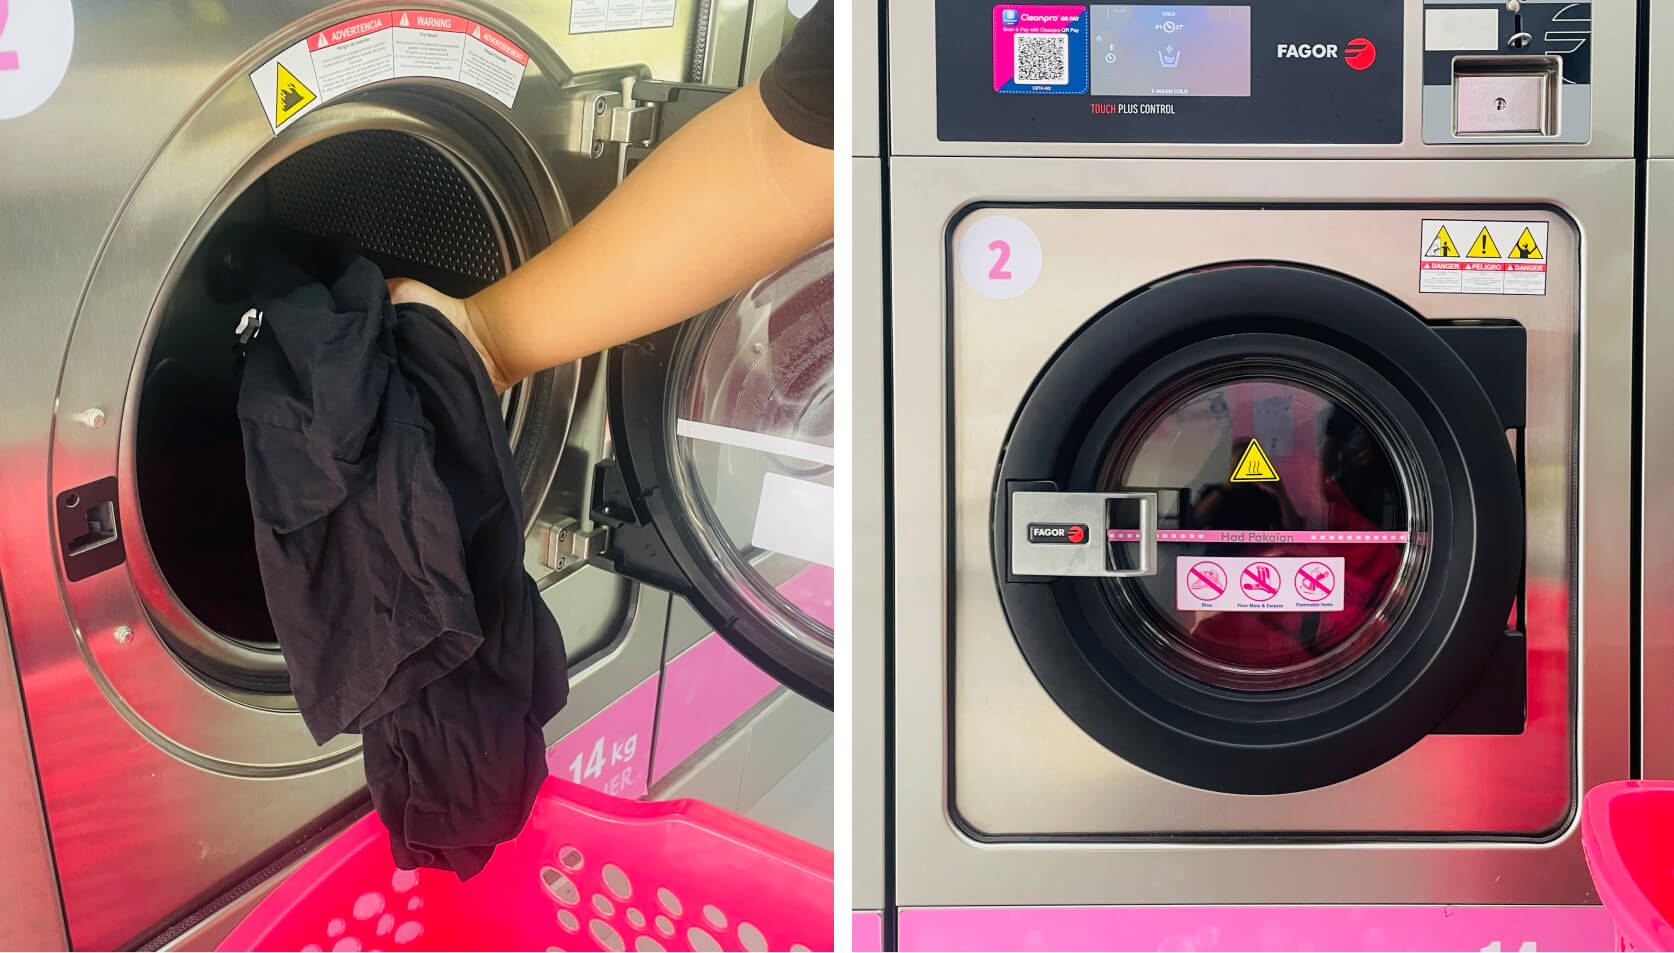 Cleanpro customer loading laundry and securely close the washer door